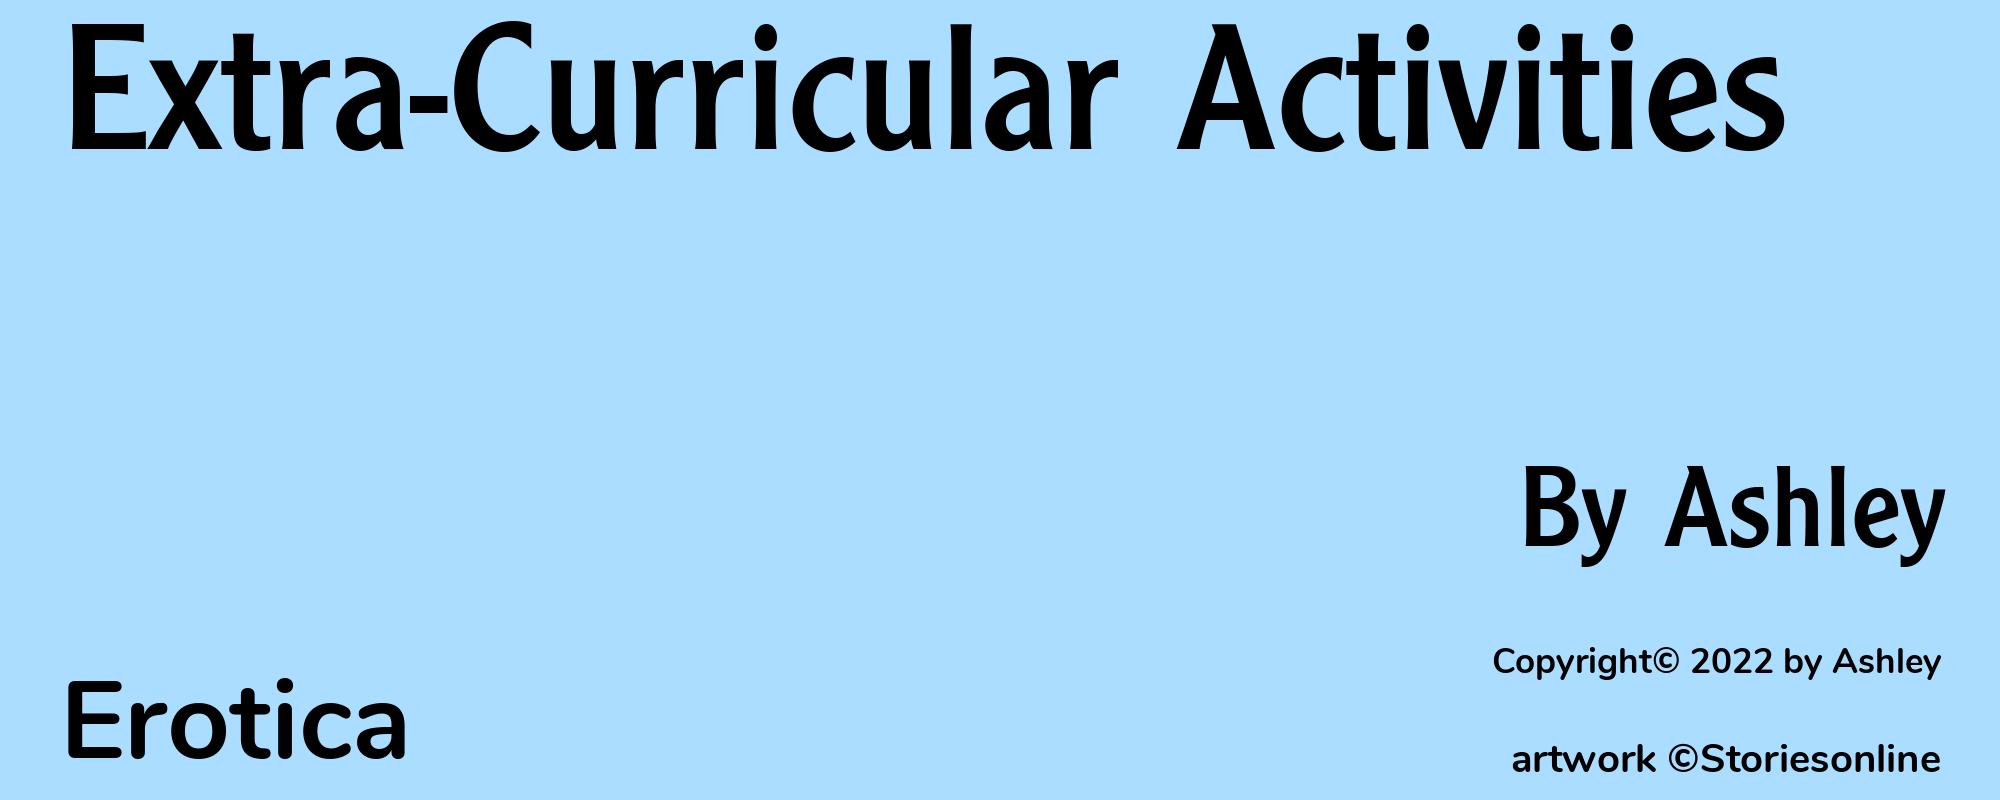 Extra-Curricular Activities - Cover